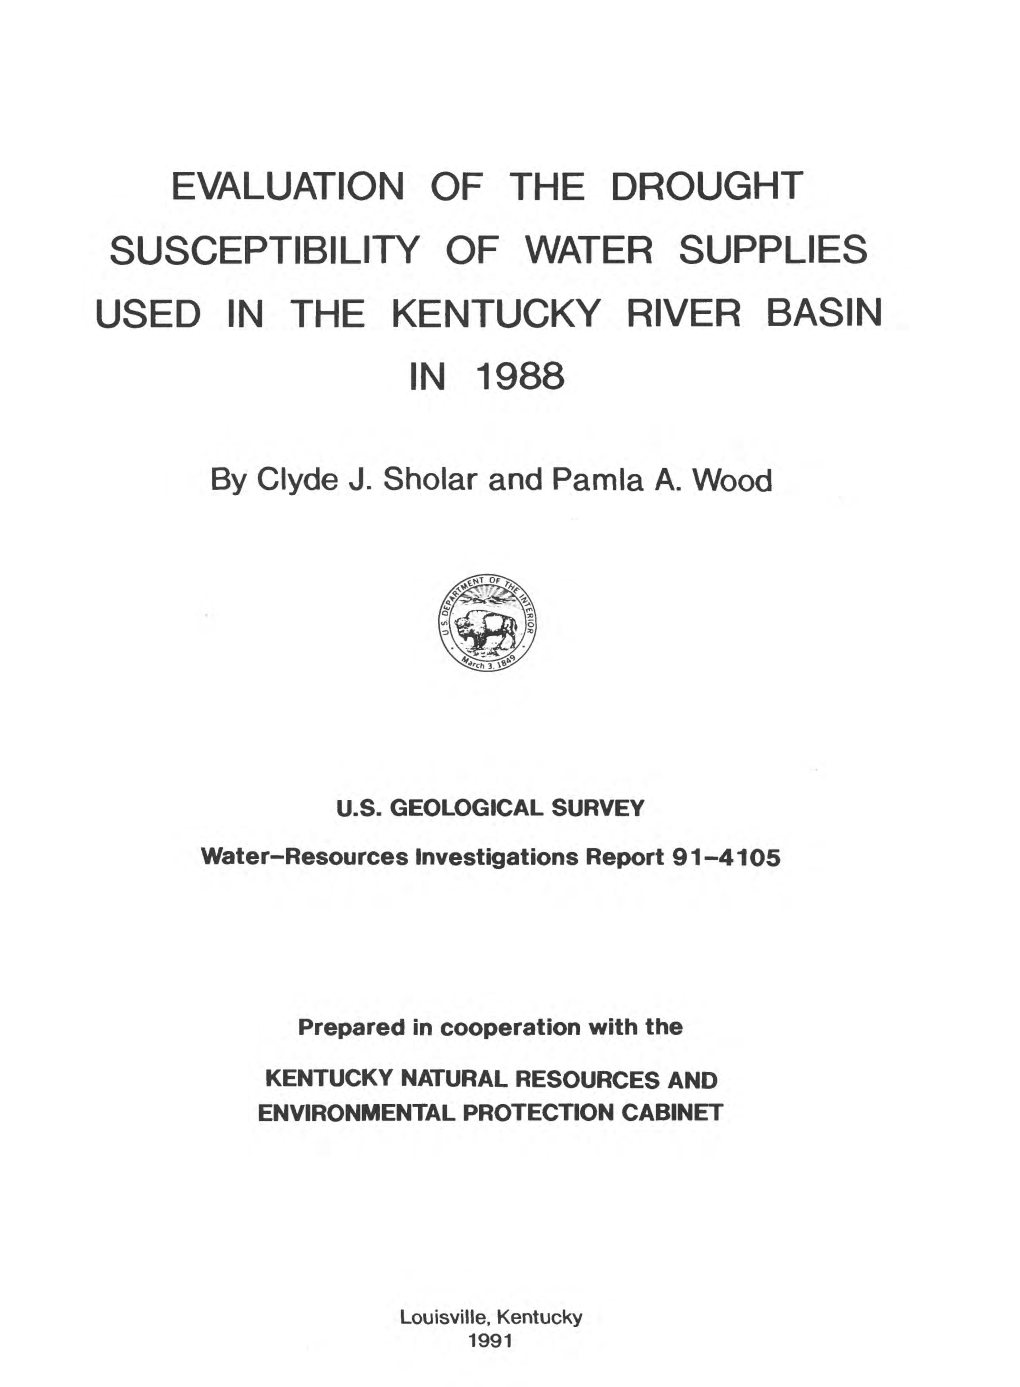 Evaluation of the Drought Susceptibility of Water Supplies Used in the Kentucky River Basin in 1988